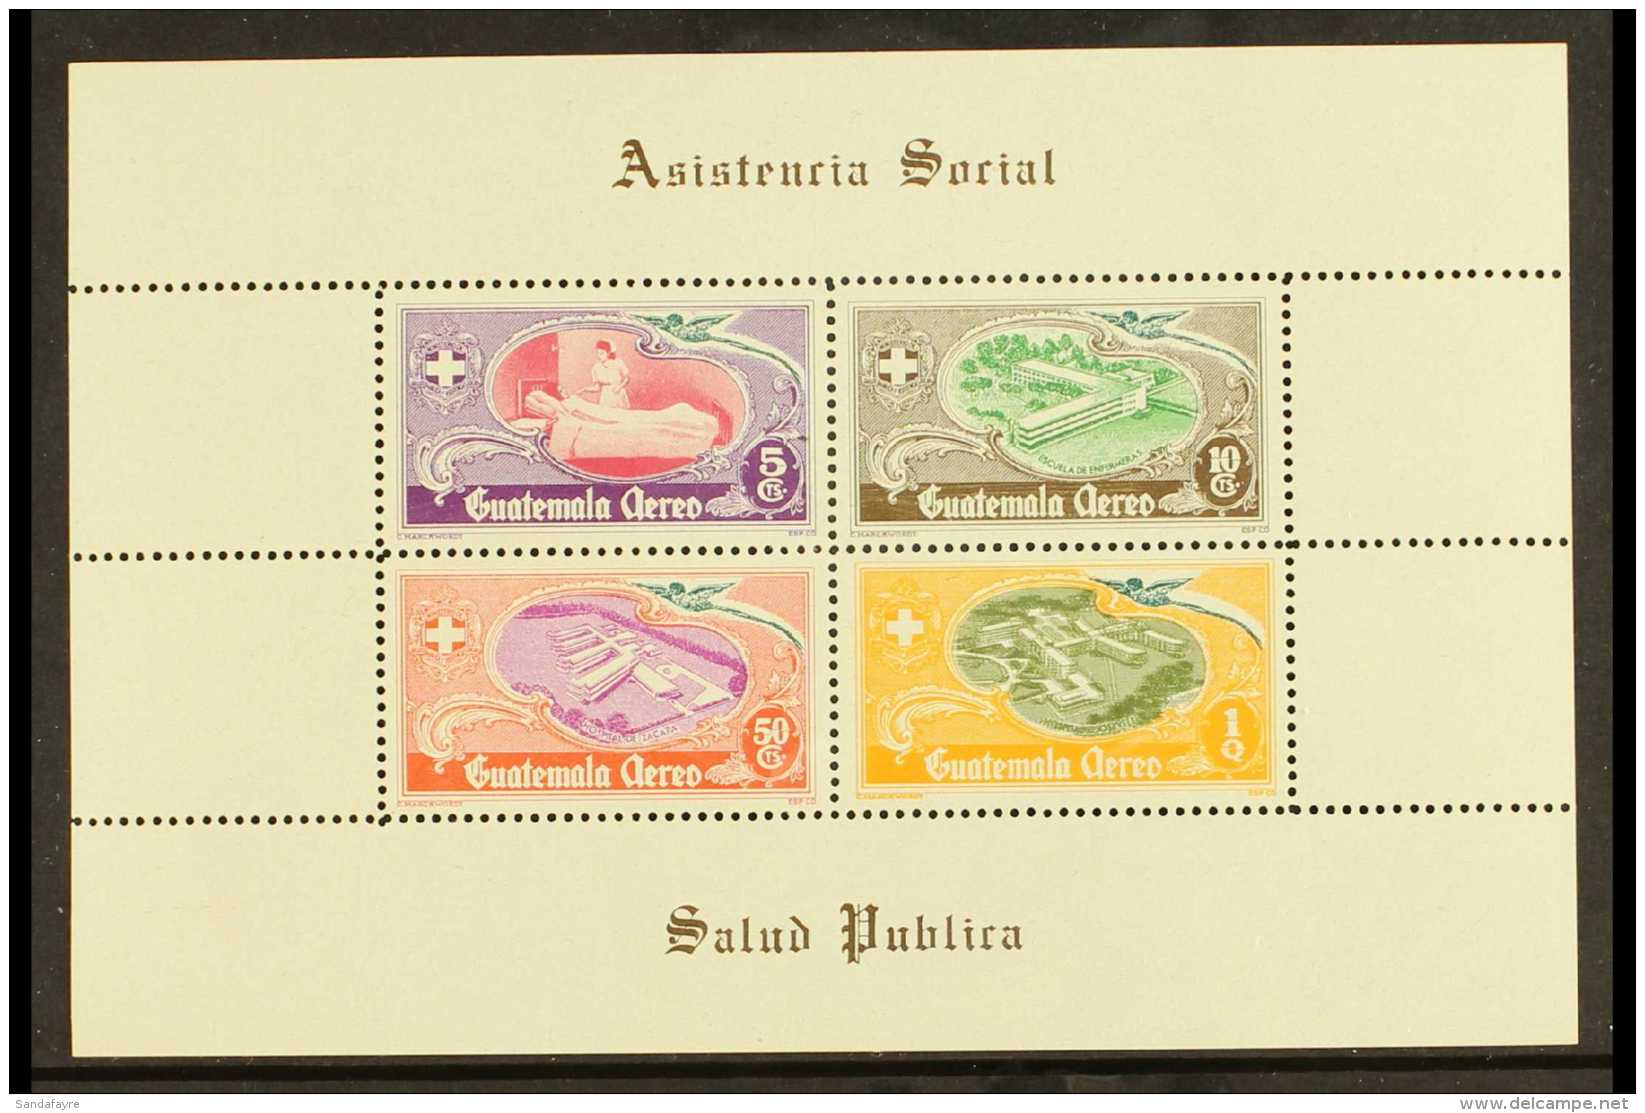 1950  National Hospital Fund Airs Miniature Sheet Showing DOUBLE PRINTED Olive Colour, As SG MS515, Scott C180a,... - Guatemala